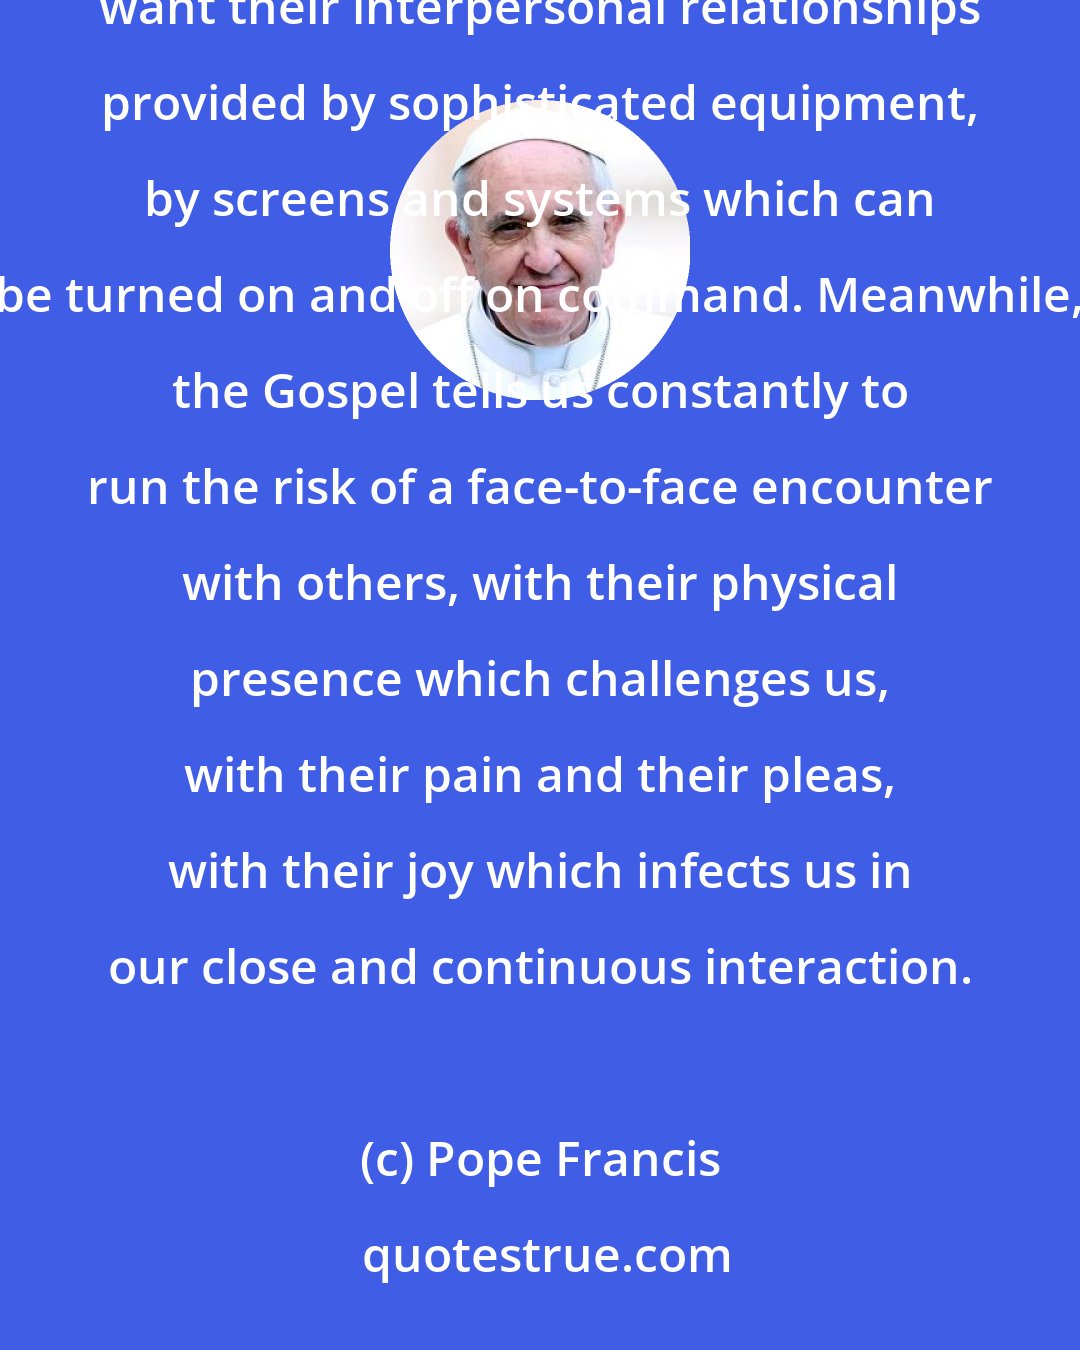 Pope Francis: For just as some people want a purely spiritual Christ, without flesh and without the cross, they also want their interpersonal relationships provided by sophisticated equipment, by screens and systems which can be turned on and off on command. Meanwhile, the Gospel tells us constantly to run the risk of a face-to-face encounter with others, with their physical presence which challenges us, with their pain and their pleas, with their joy which infects us in our close and continuous interaction.